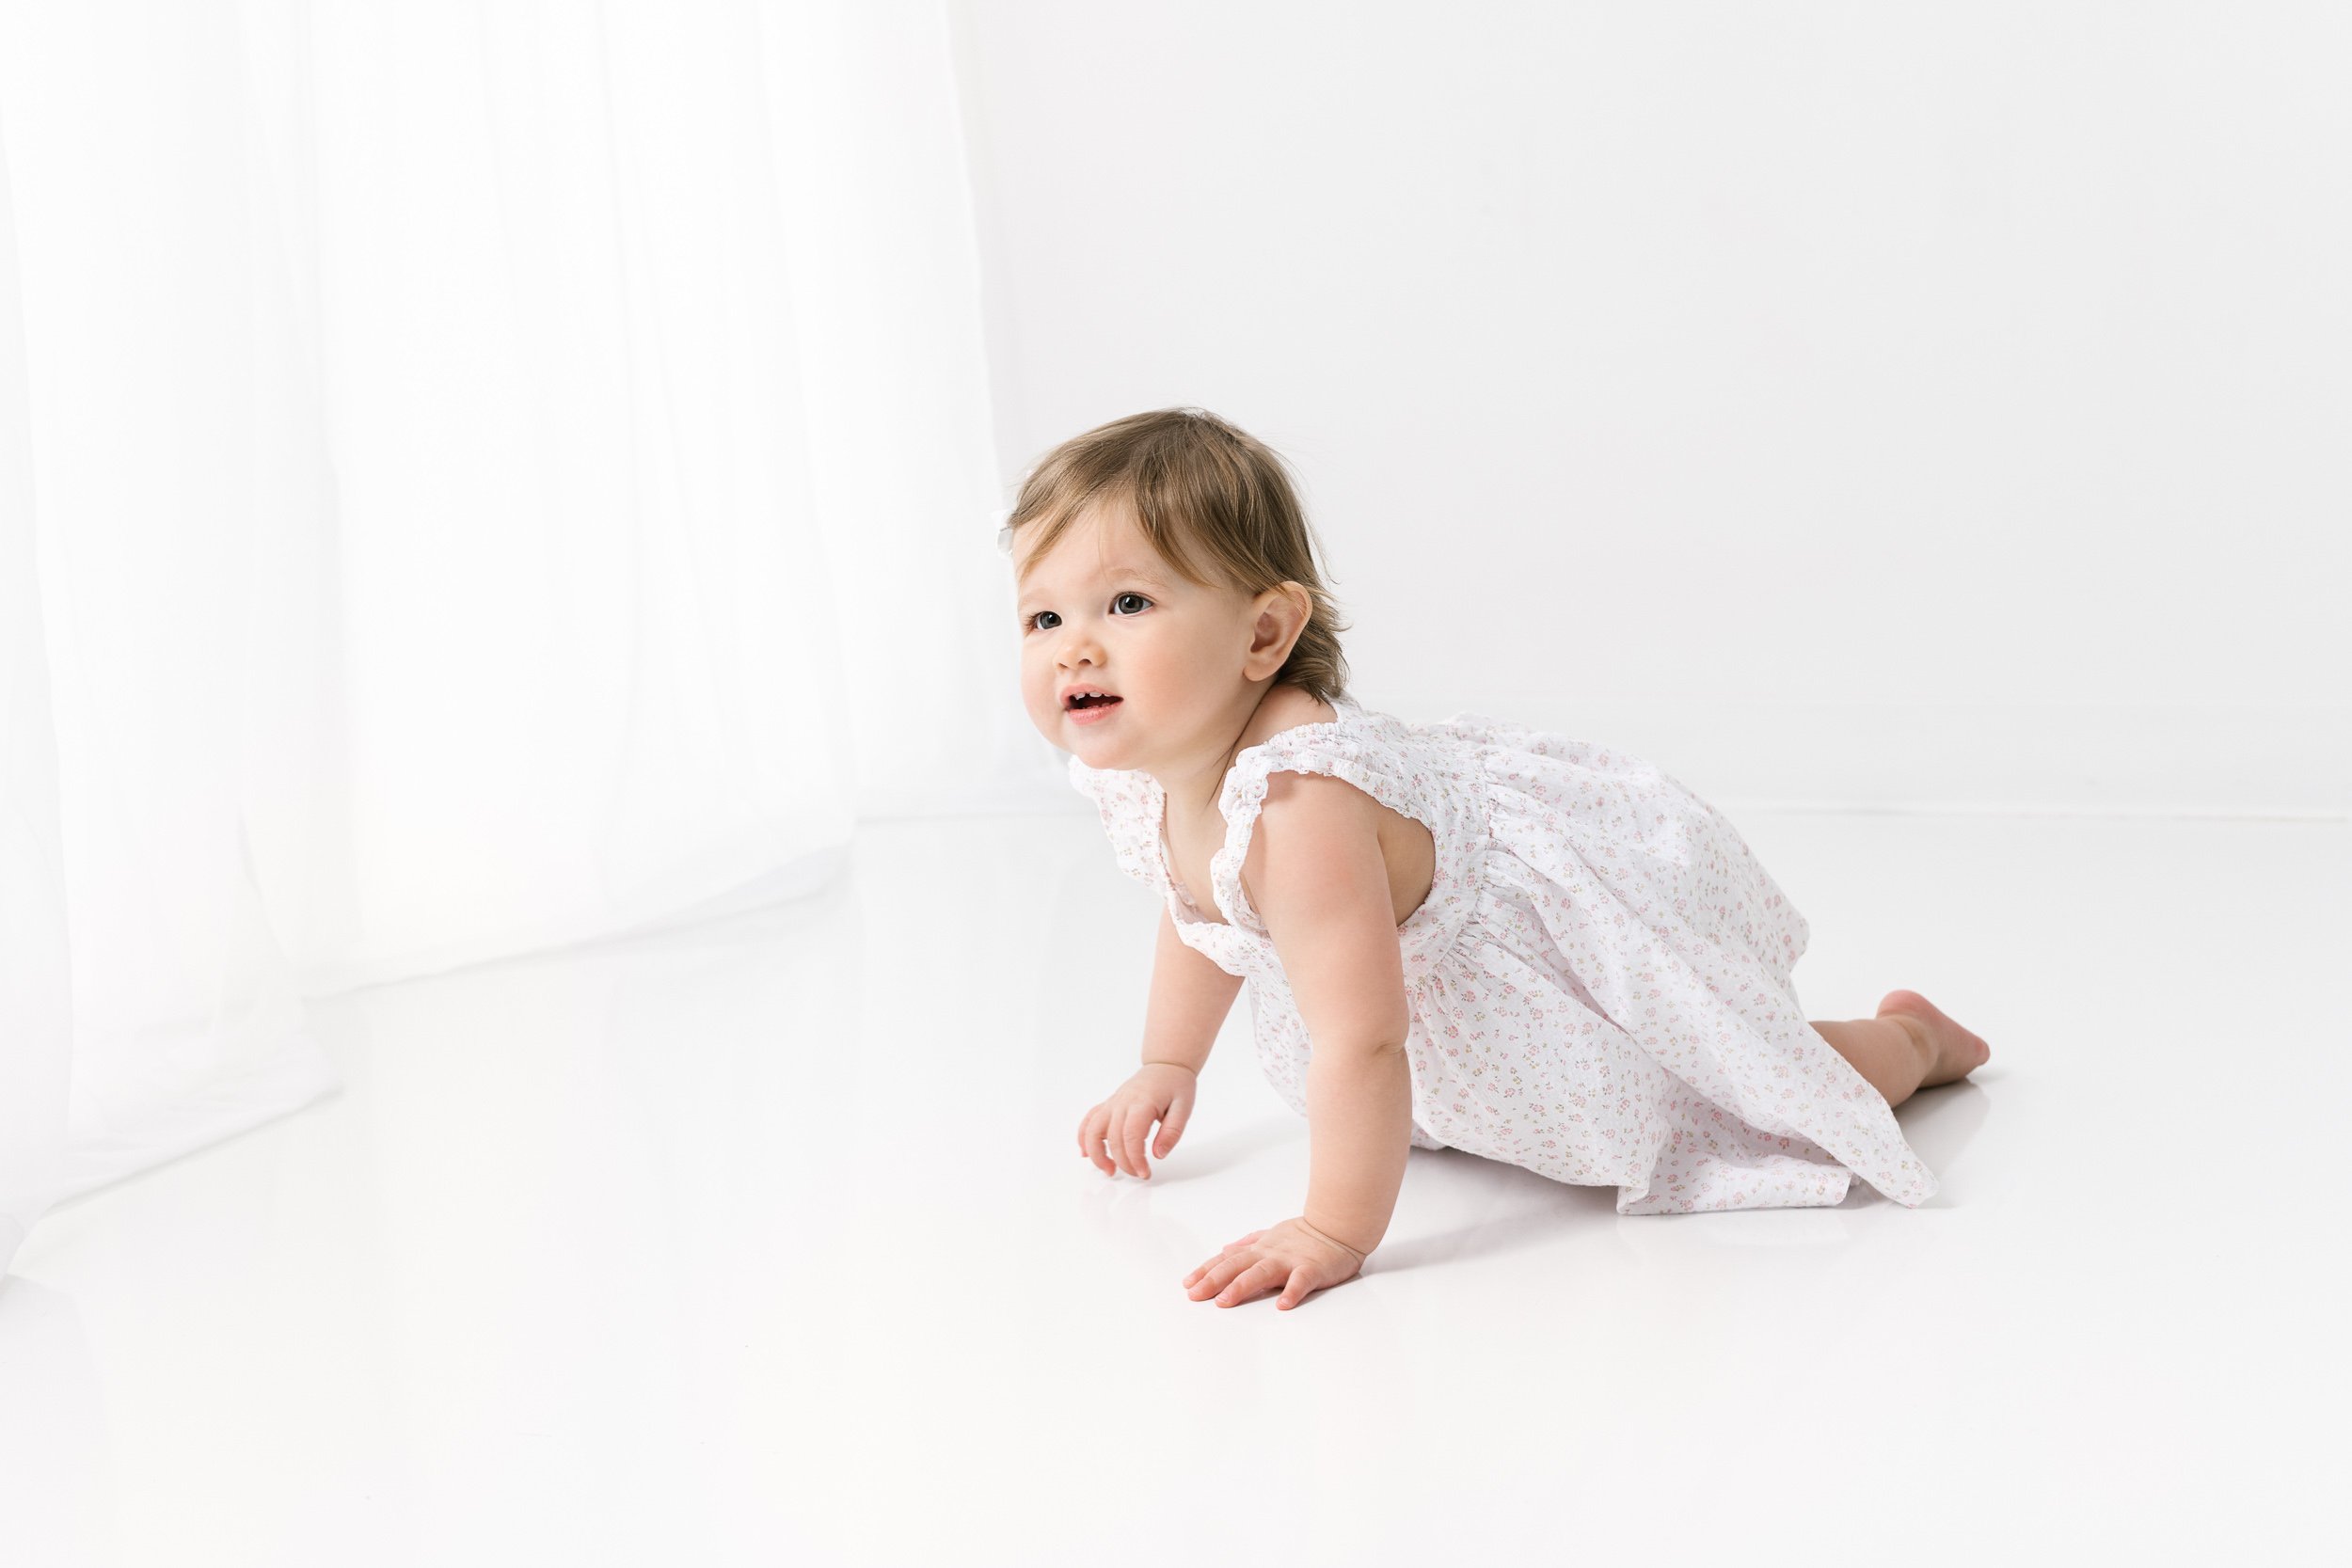  Little girl crawling around a studio for a birthday portrait session by Nicole Hawkins Photography. birthday portraits baby #NicoleHawkinsPhotography #NicoleHawkinsBabies #studiochildren #firstbirthday #studiophotography #girlsbirthdayportraits 